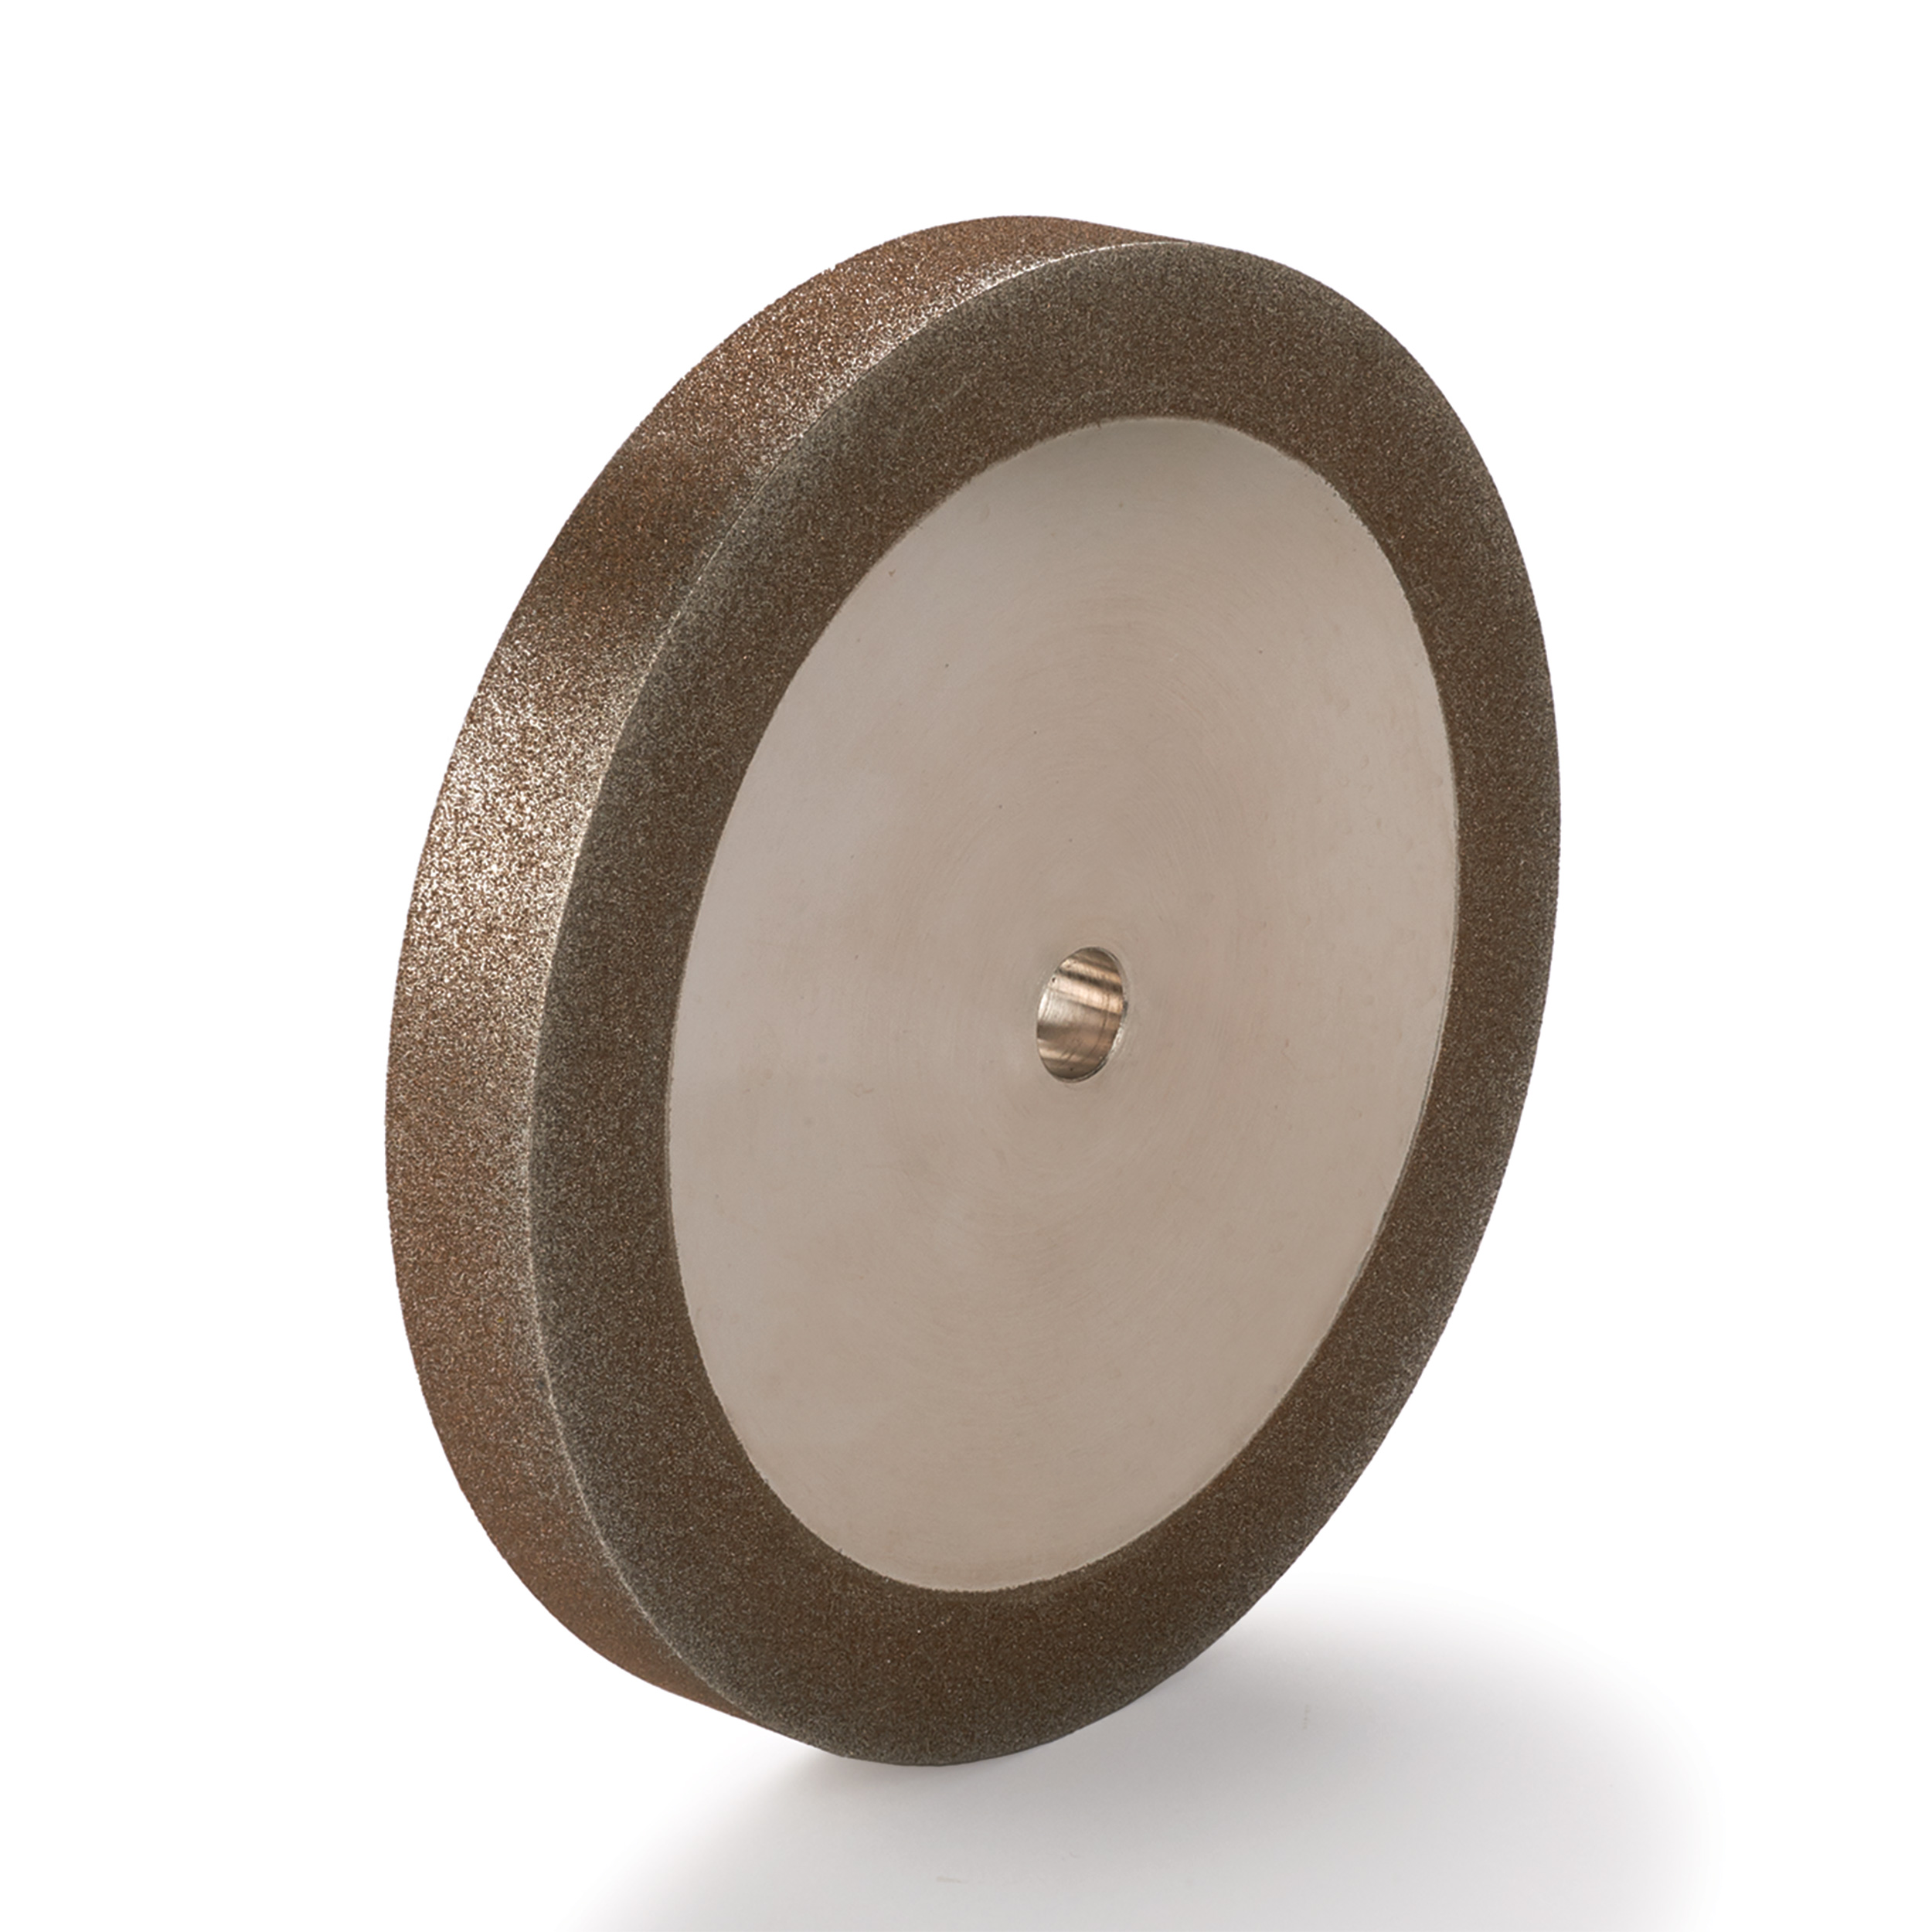 Woodriver 120-grit Cbn Grinding Wheel, 6"x 3/4" For Grinders With A 1/2" Arbor